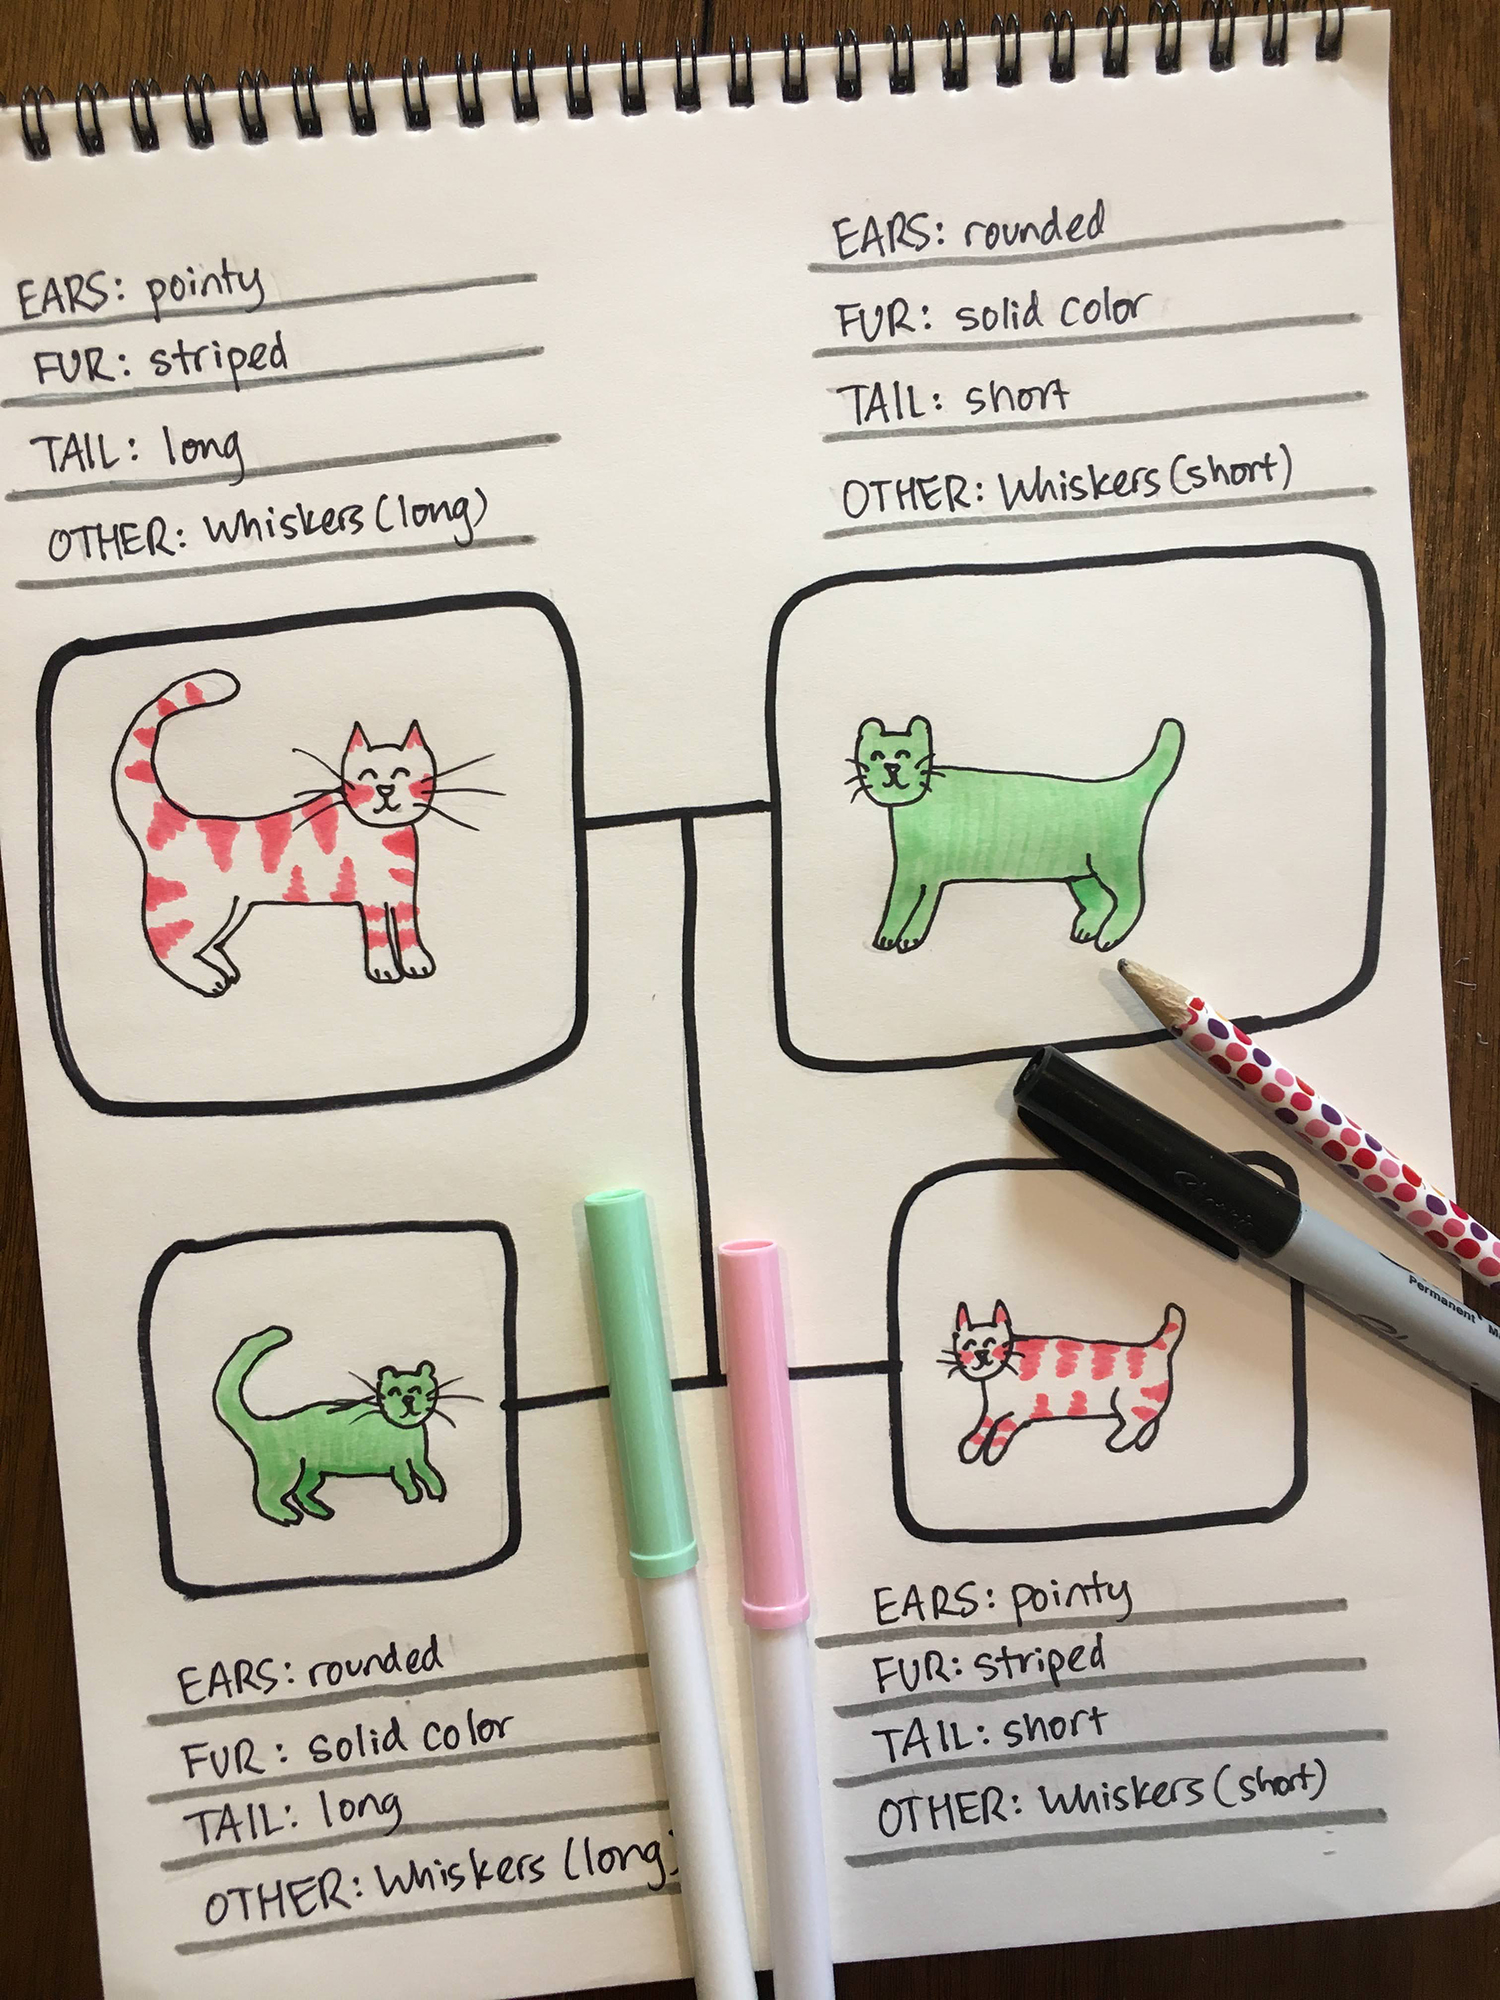 notepad showing four drawn animals and their characteristics